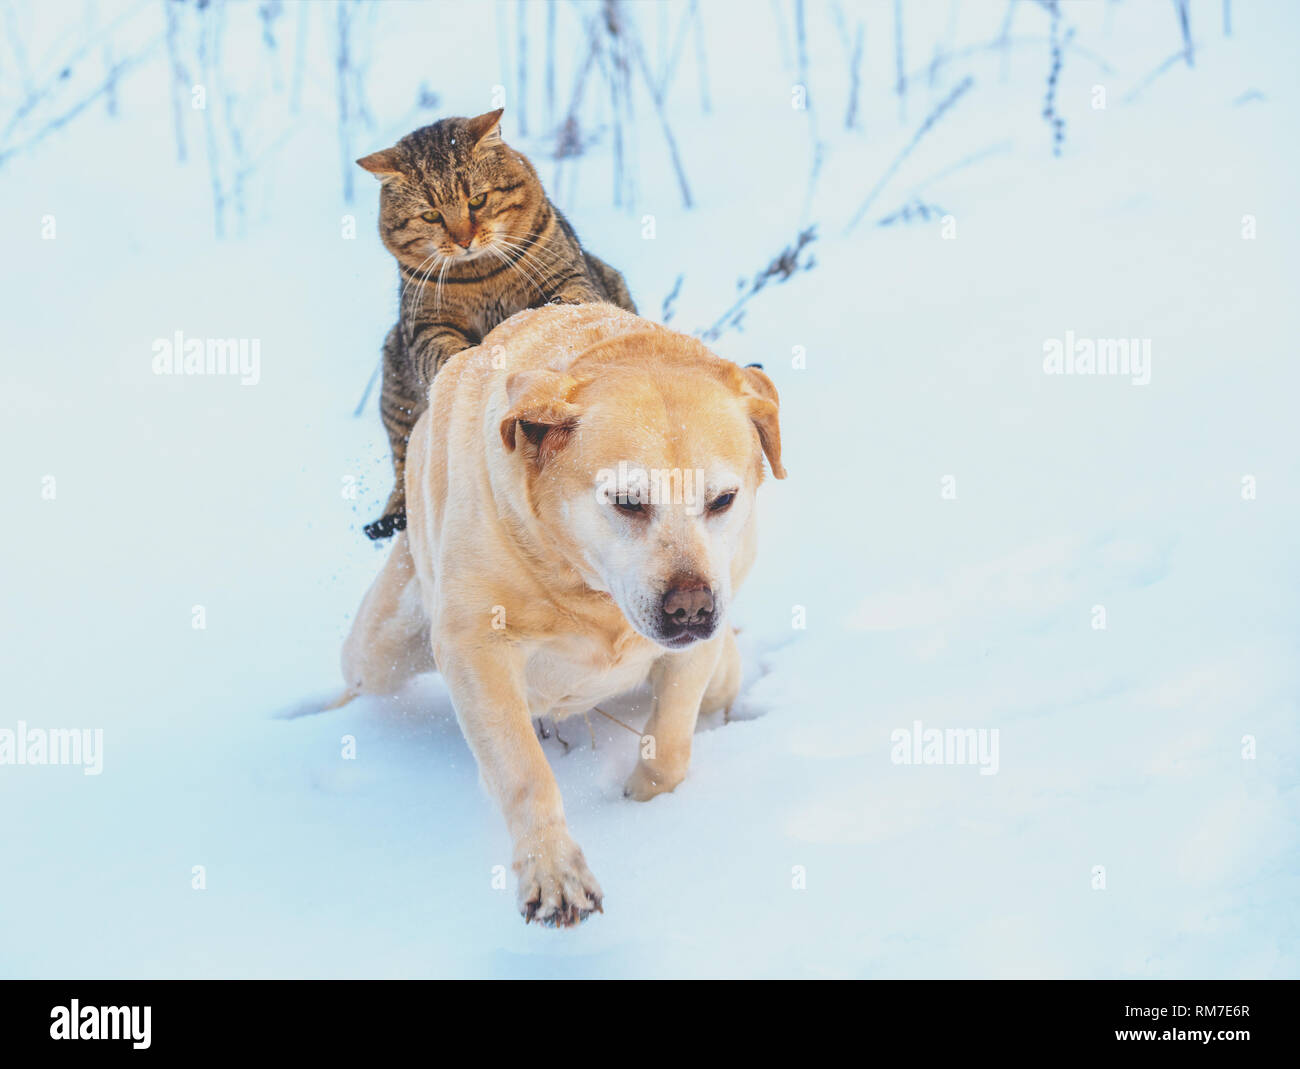 Funny cat and dog are best friends. Cat riding the dog outdoors in snowy winter Stock Photo